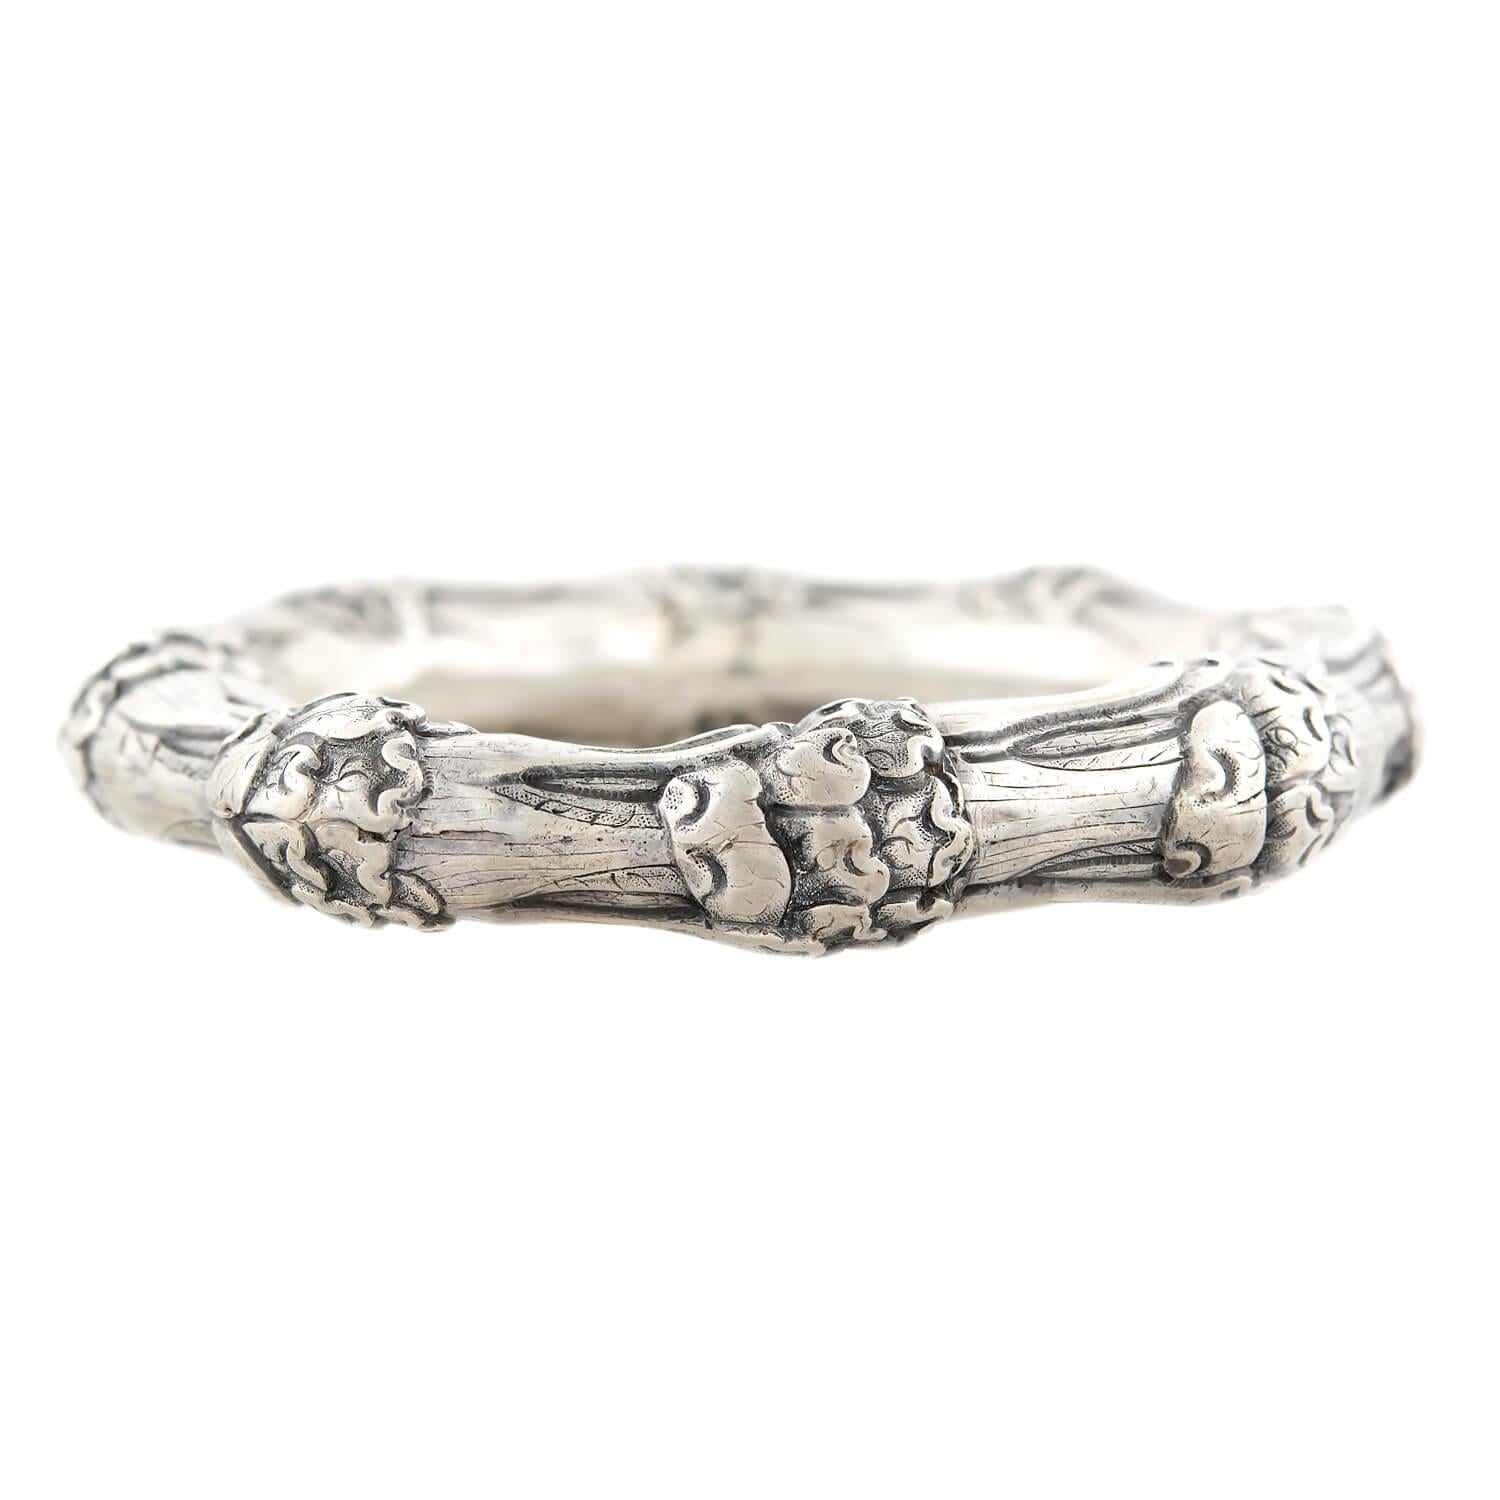 Victorian Sterling Silver Repousse Bangle